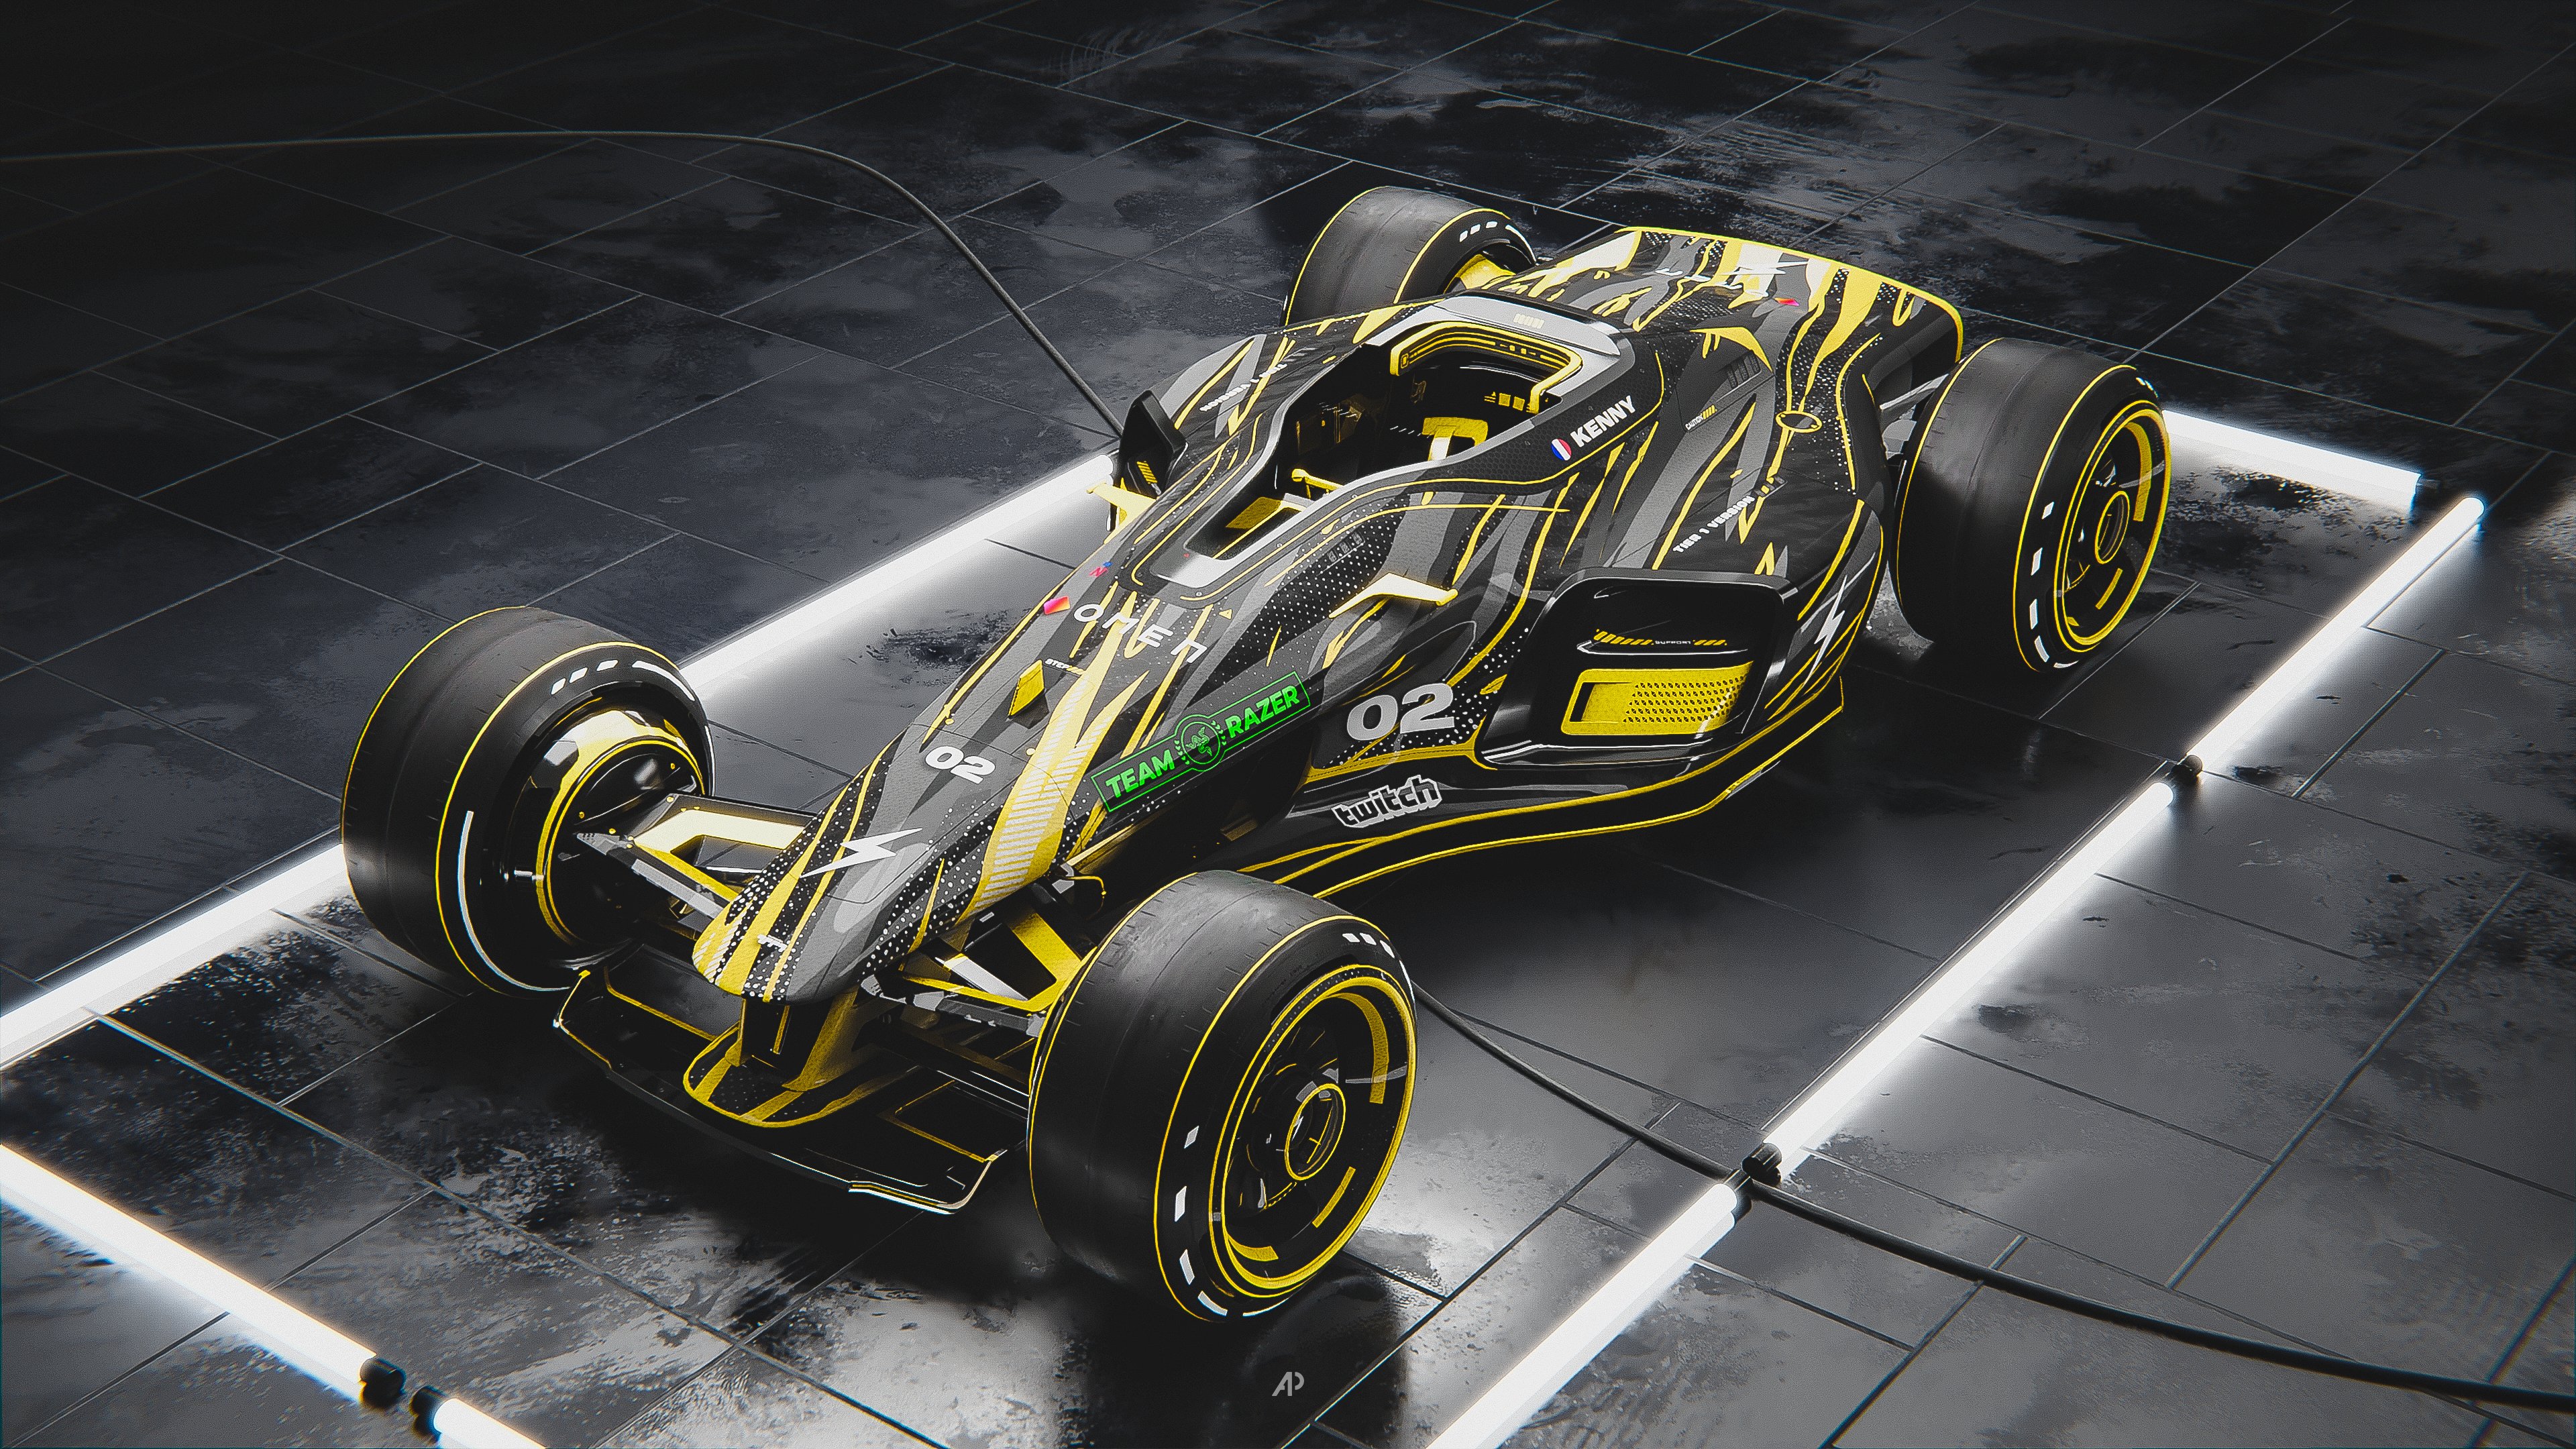 Kenny 2022 skin used during of the ZrT Trackmania Cup 2022